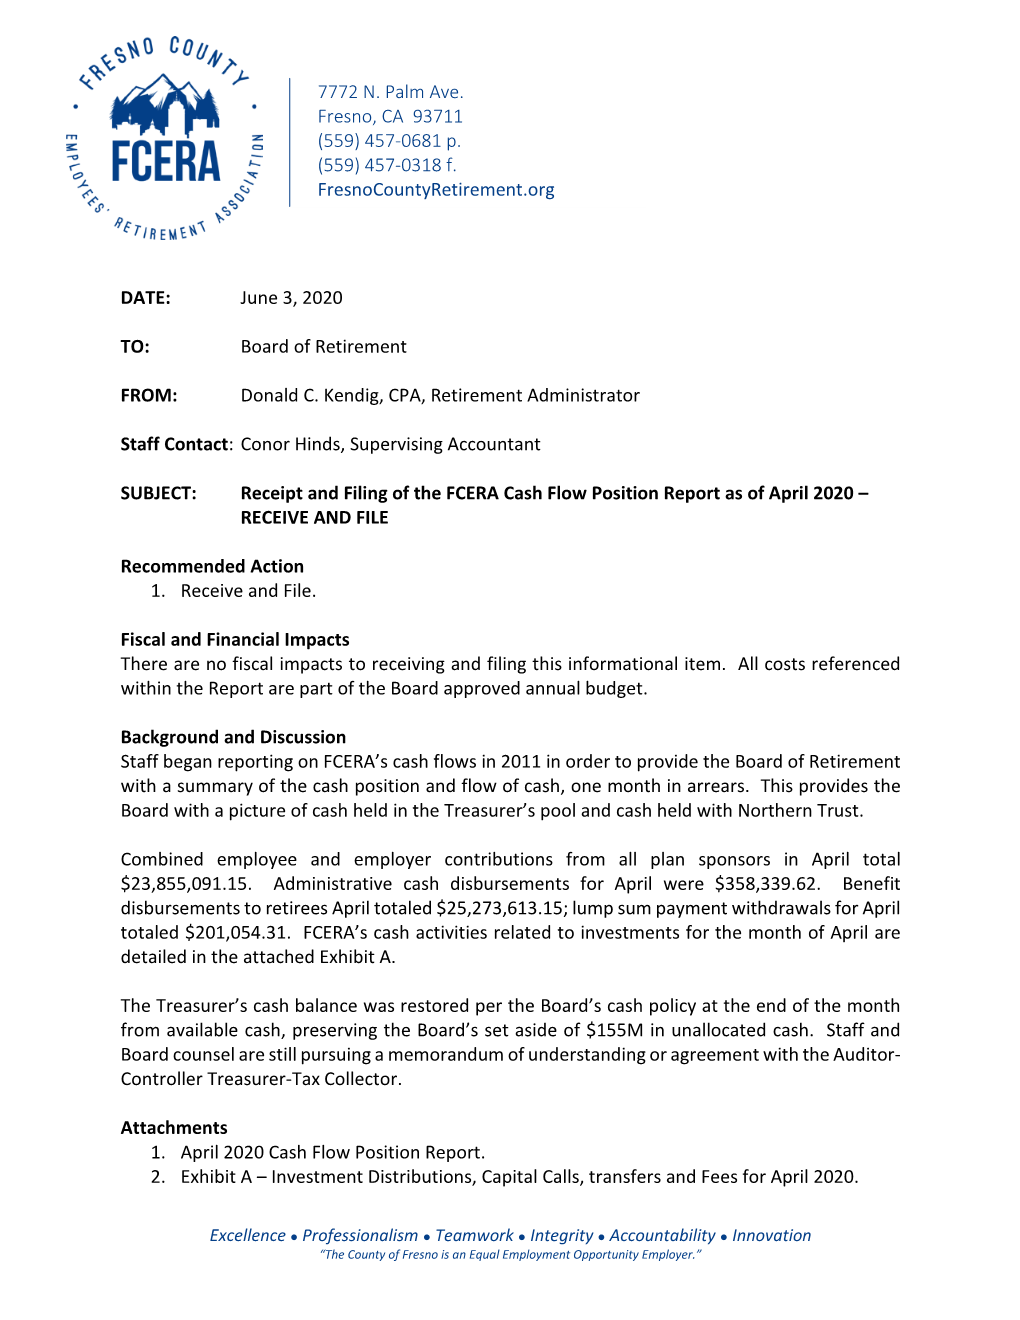 Receipt and Filing of the FCERA Cash Flow Position Report As of April 2020 – RECEIVE and FILE